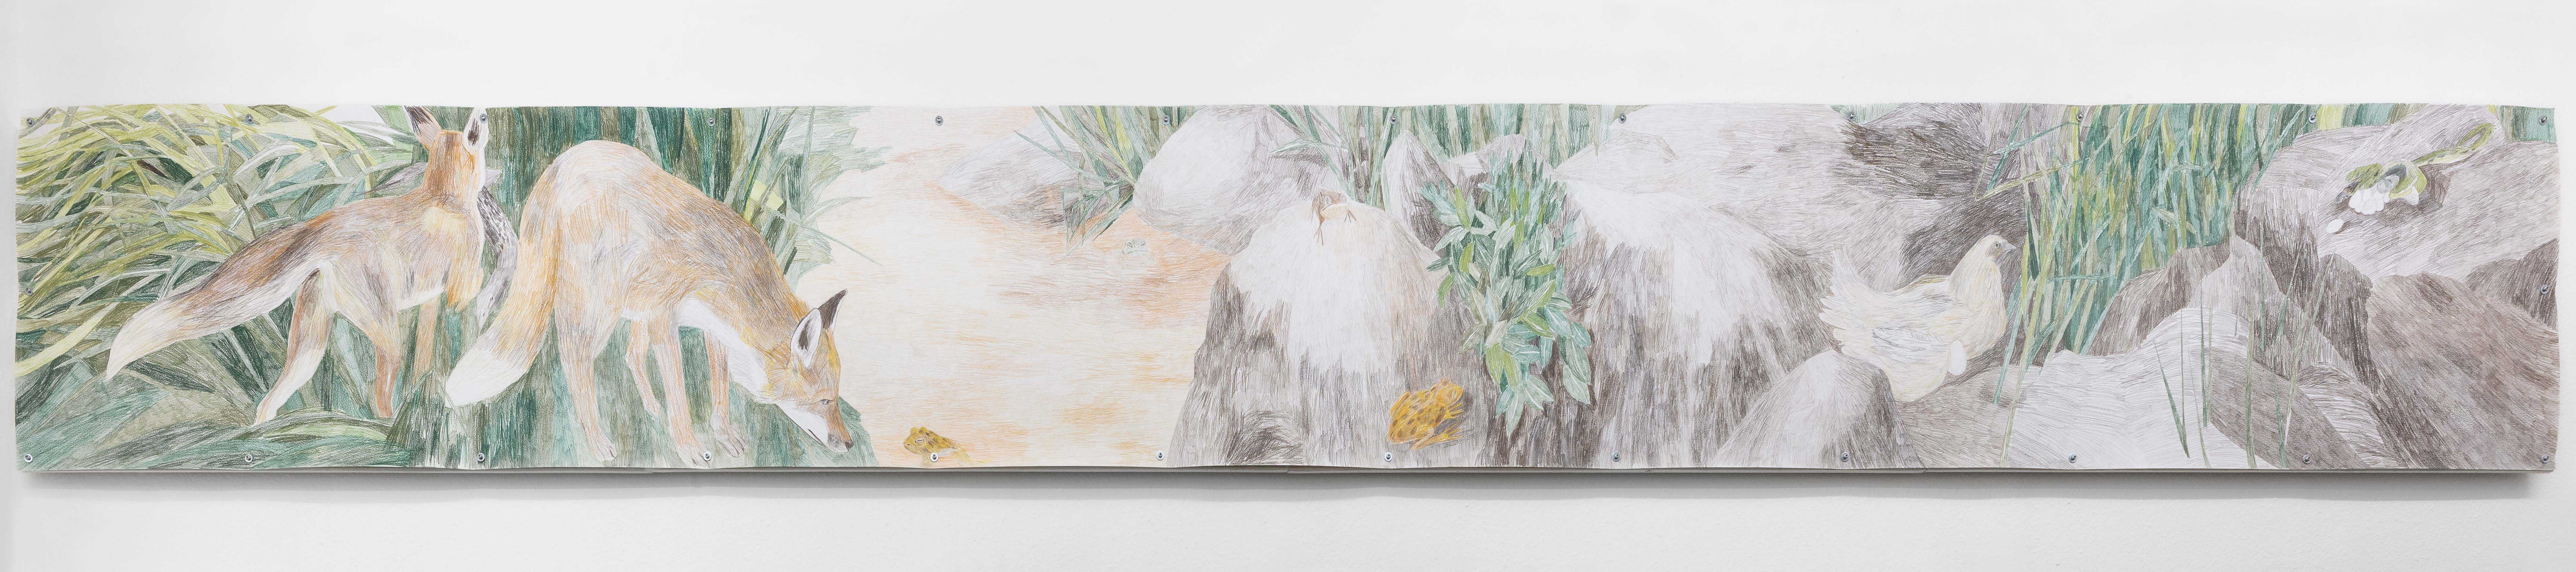 Agnese Galiotto, Of foxes and birds. Stories from the hill. (West), 2023, Crayon on paper on drywall mount, 480cm x 60cm